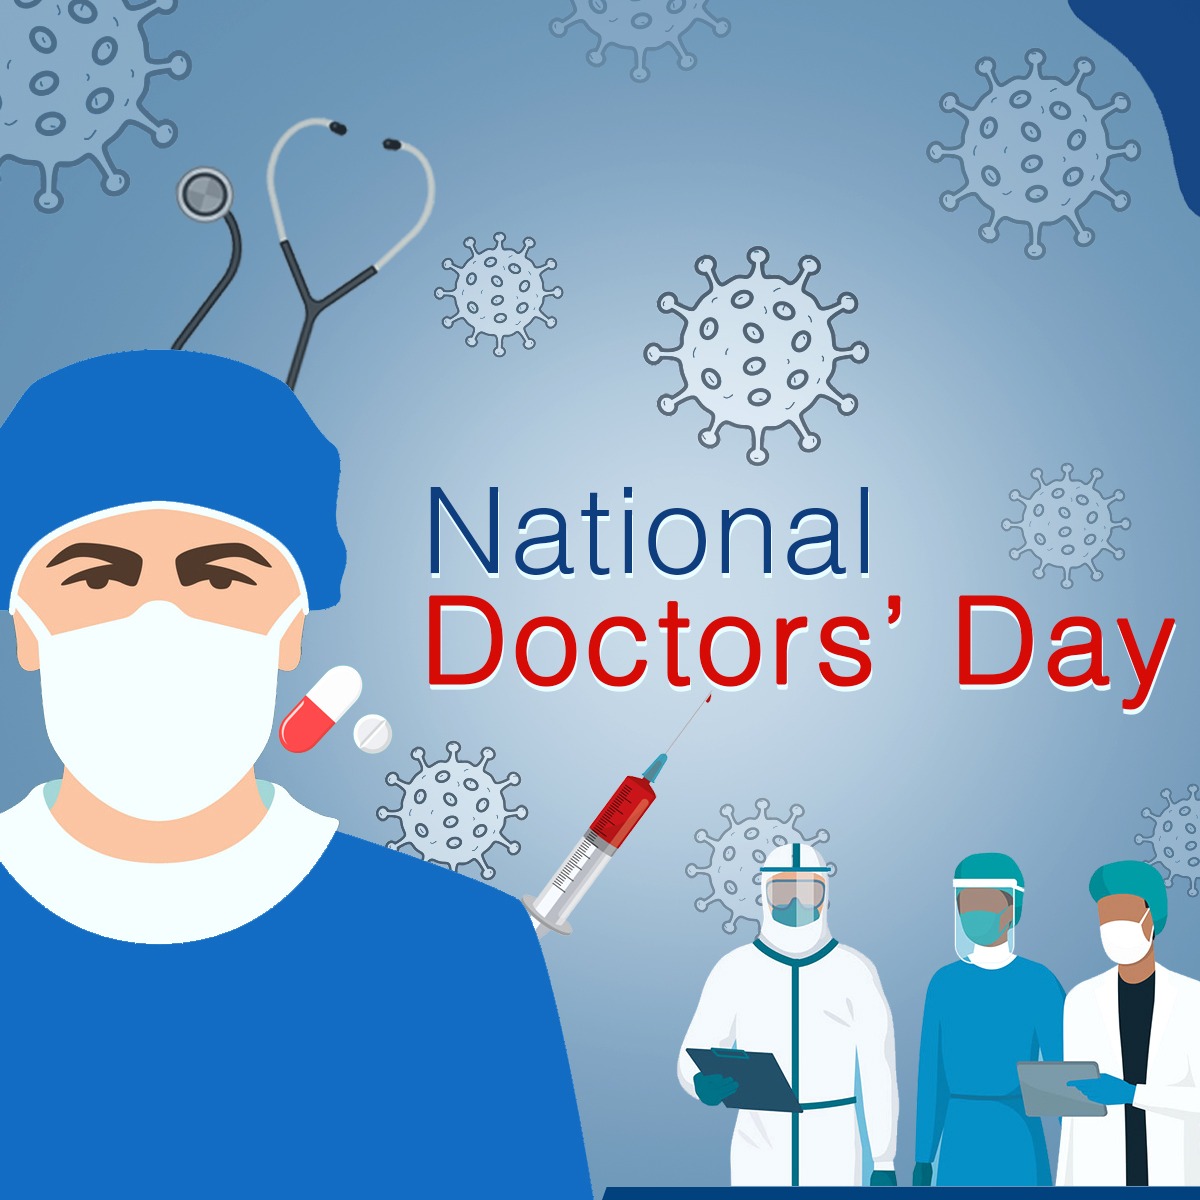 NATIONAL DOCTORS DAY